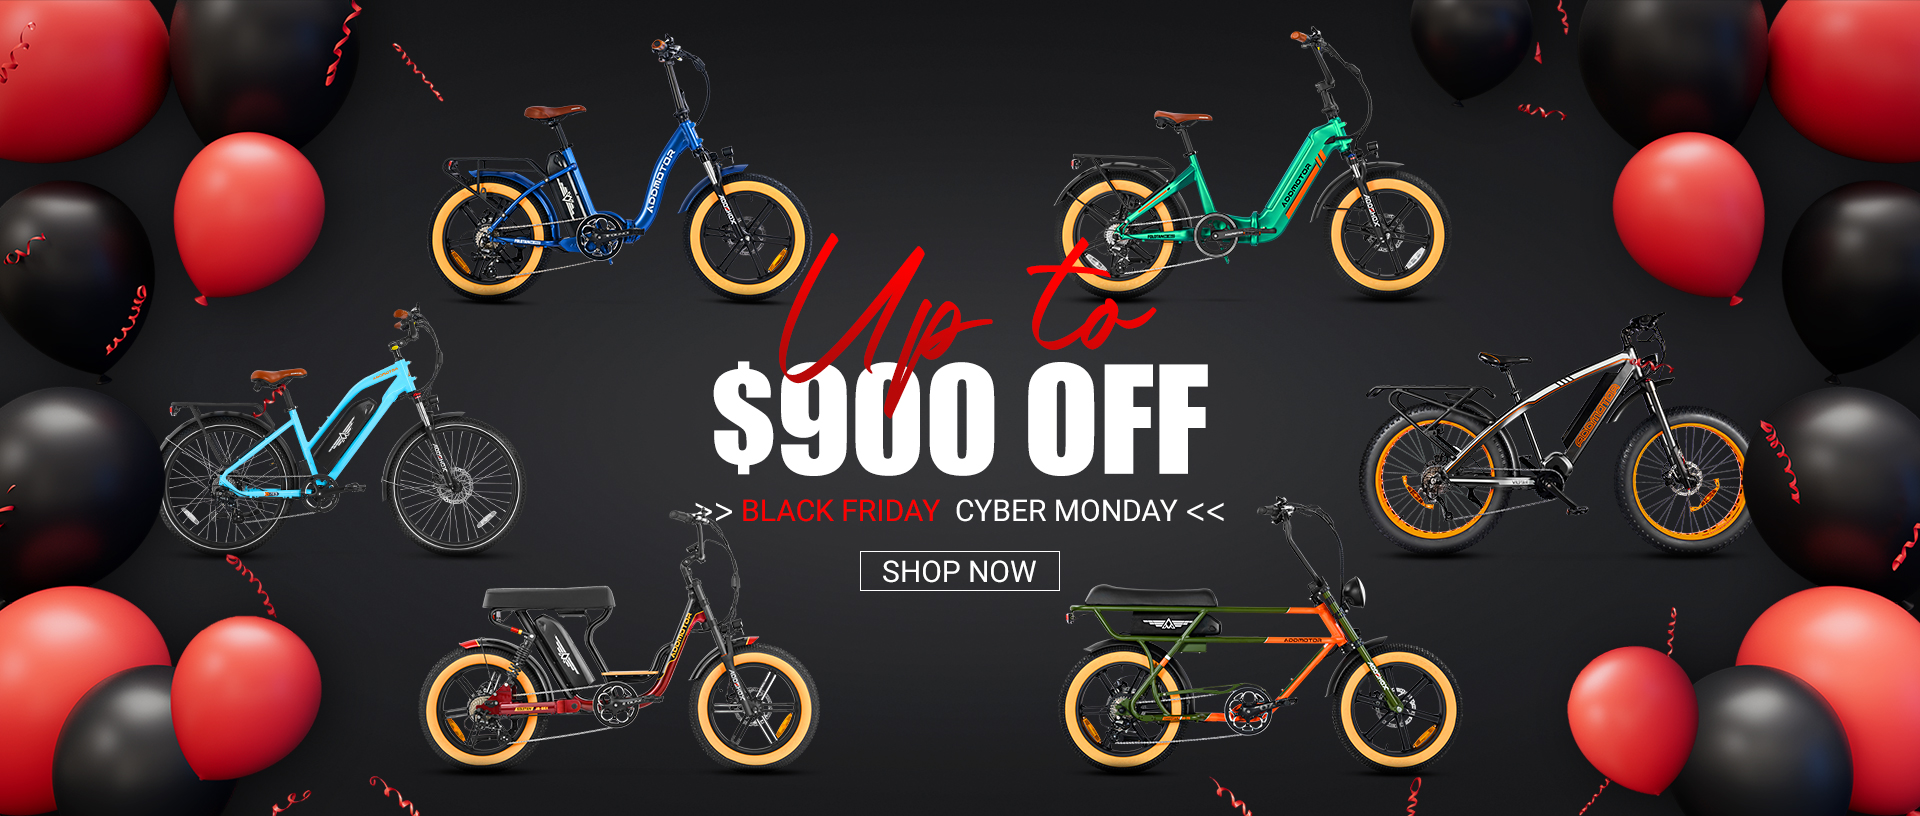 up to $900 off addmotor ebike black friday sale